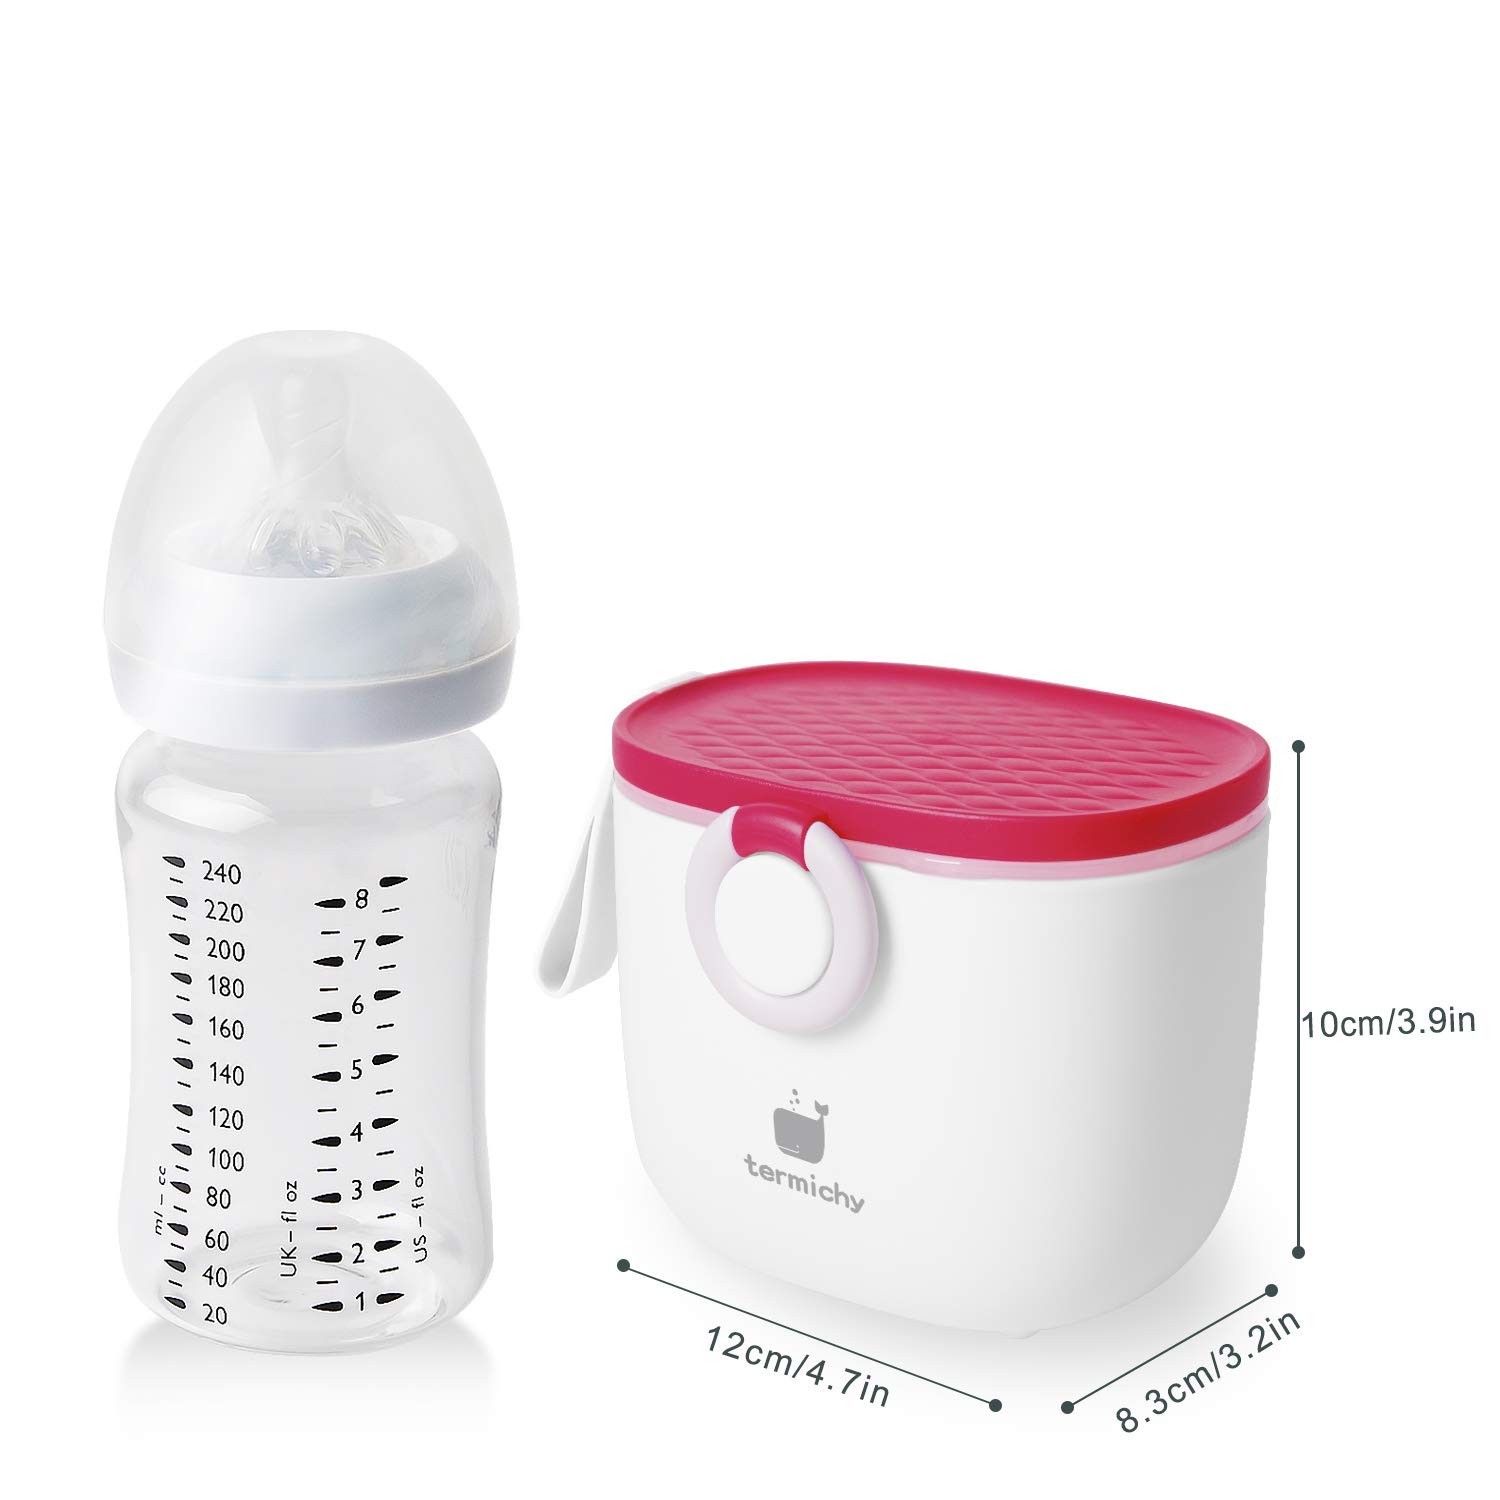 Termichy Baby Formula Dispenser, Portable Milk Powder Dispenser Container  with Carry Handle and Scoop for Travel Outdoor Activities with Baby Infant